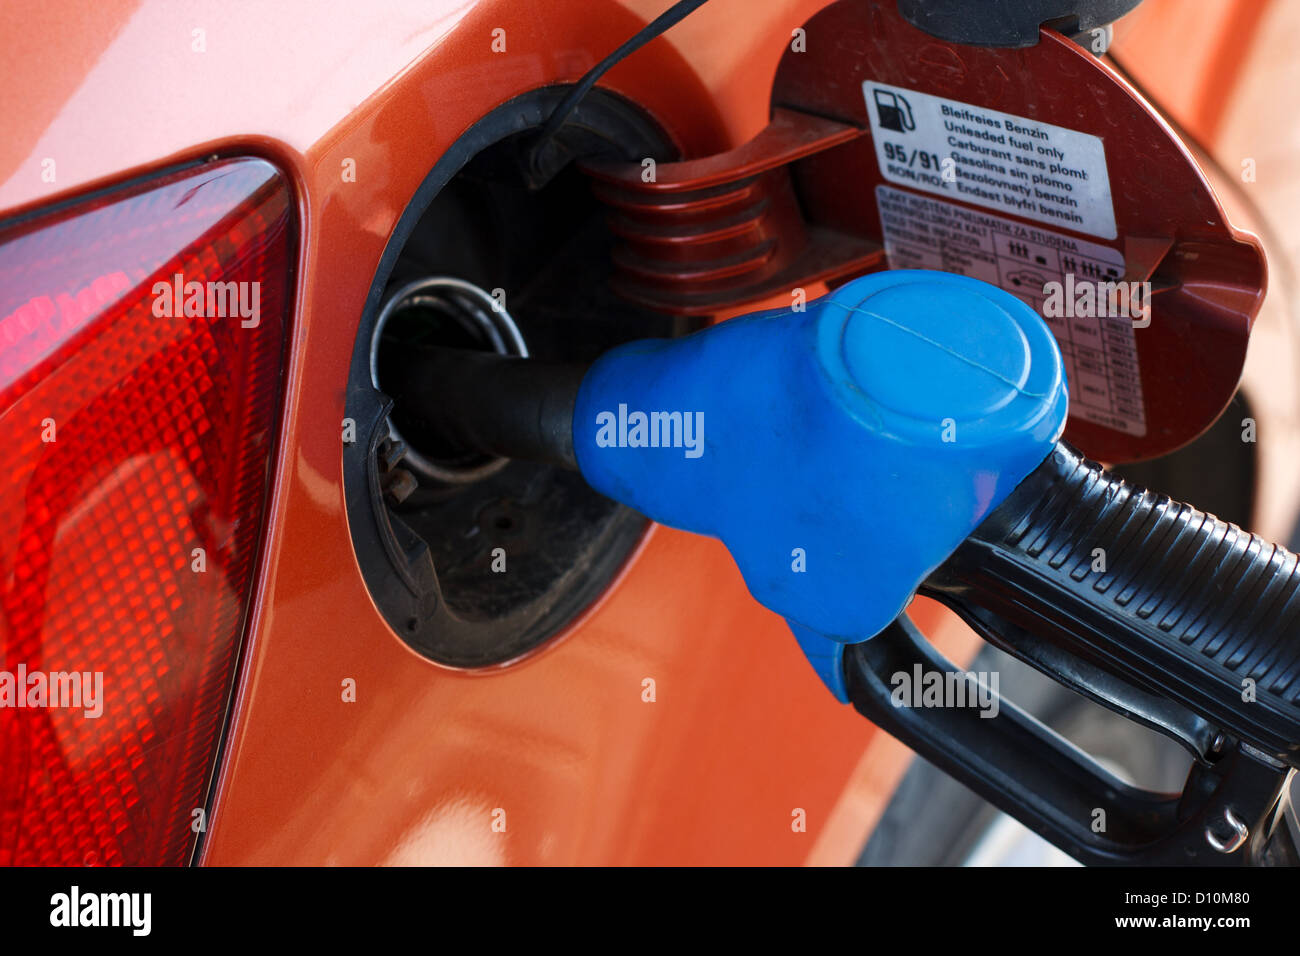 orange car at gas station being filled with fuel Stock Photo